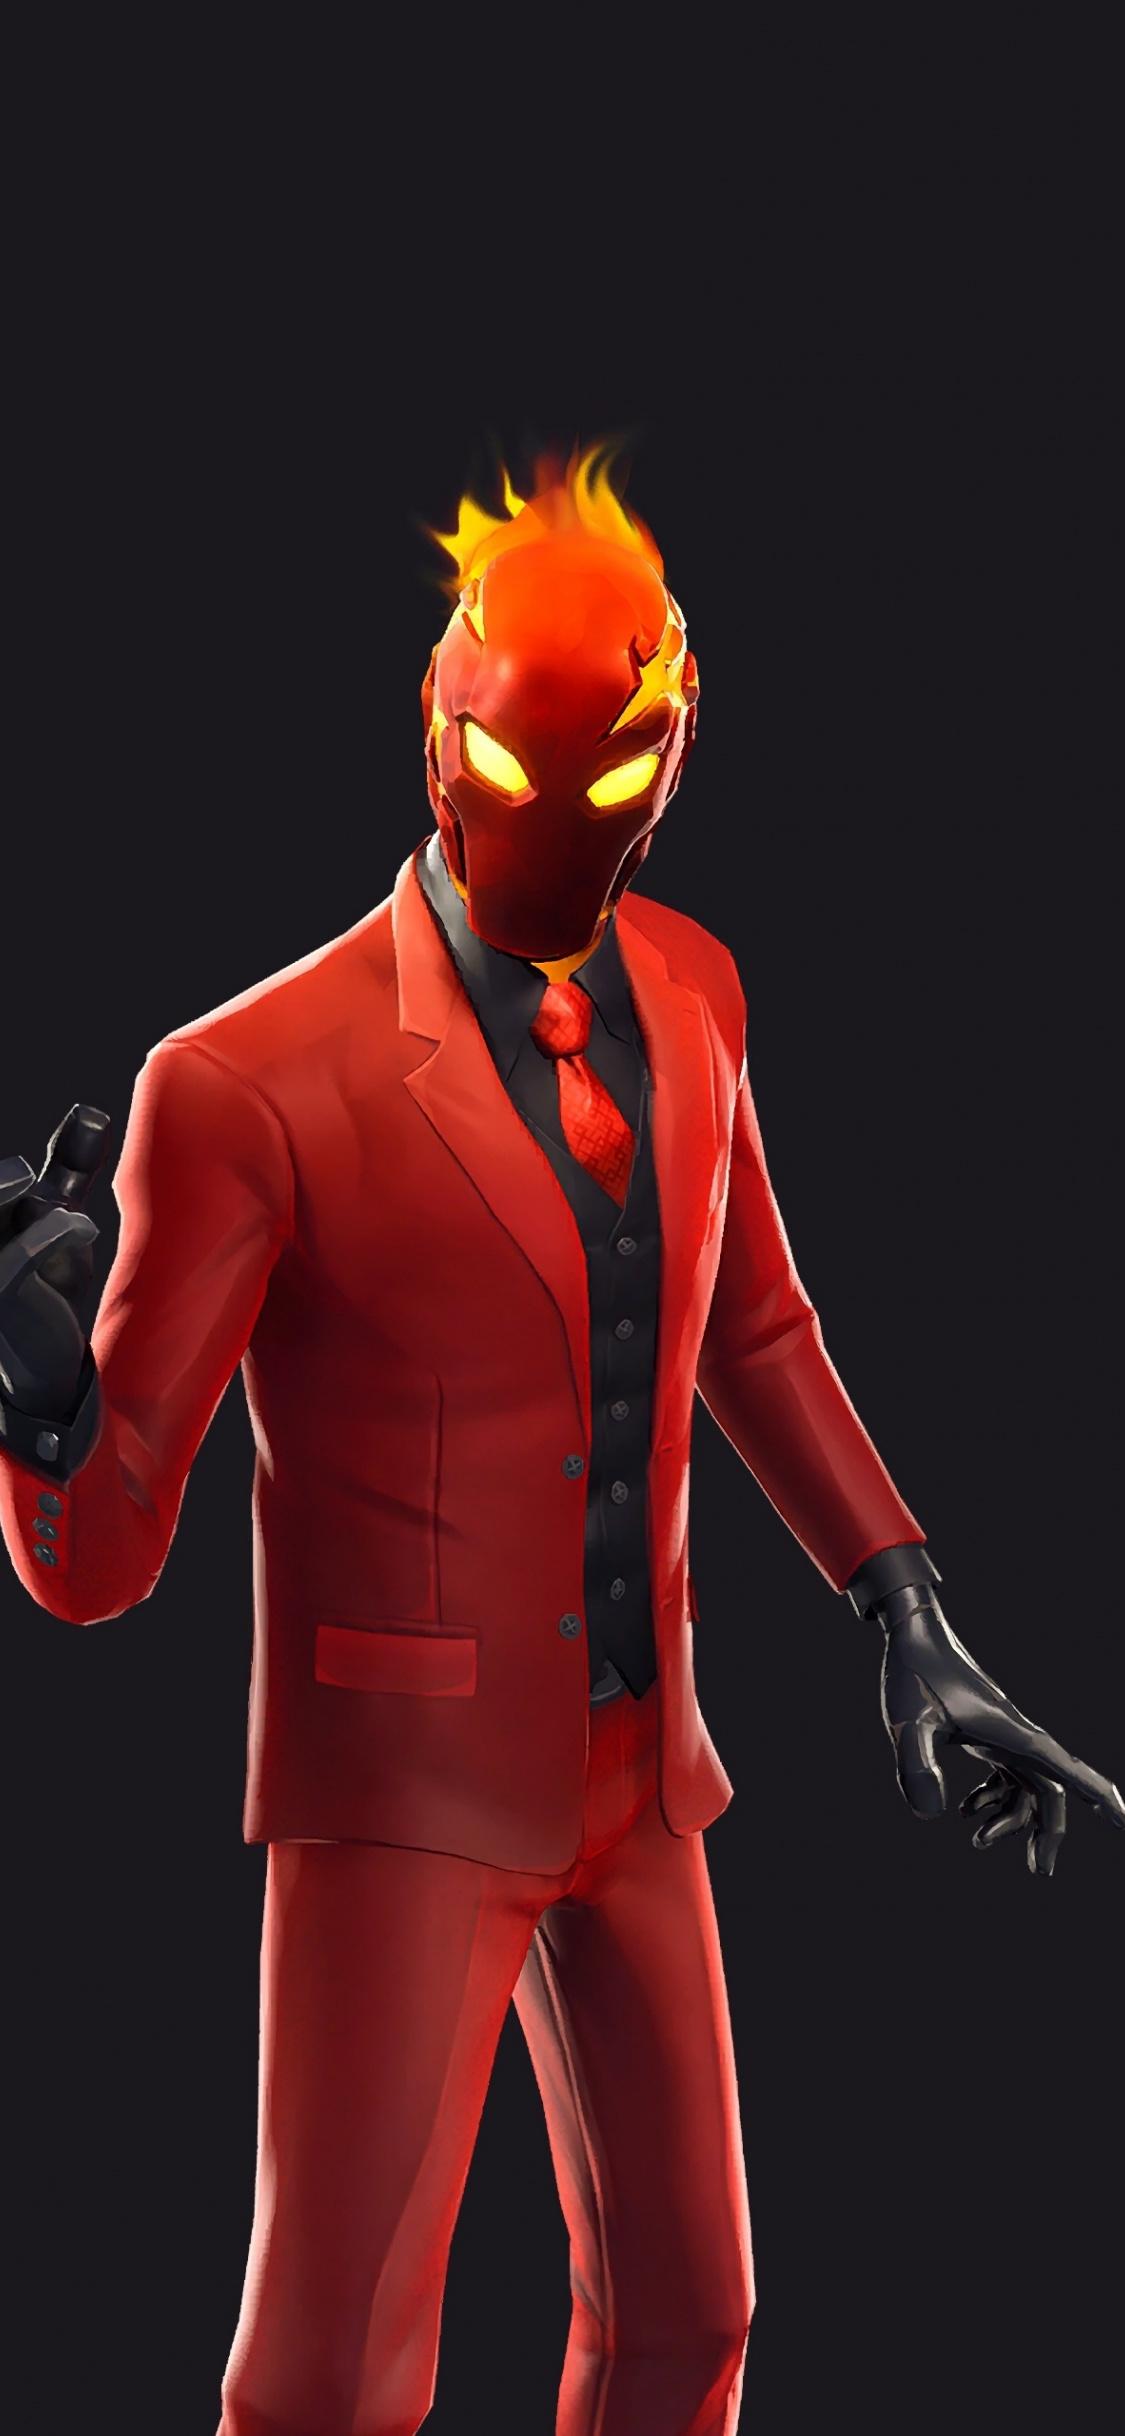 Download 1125x2436 wallpaper game, red suit, inferno, fortnite